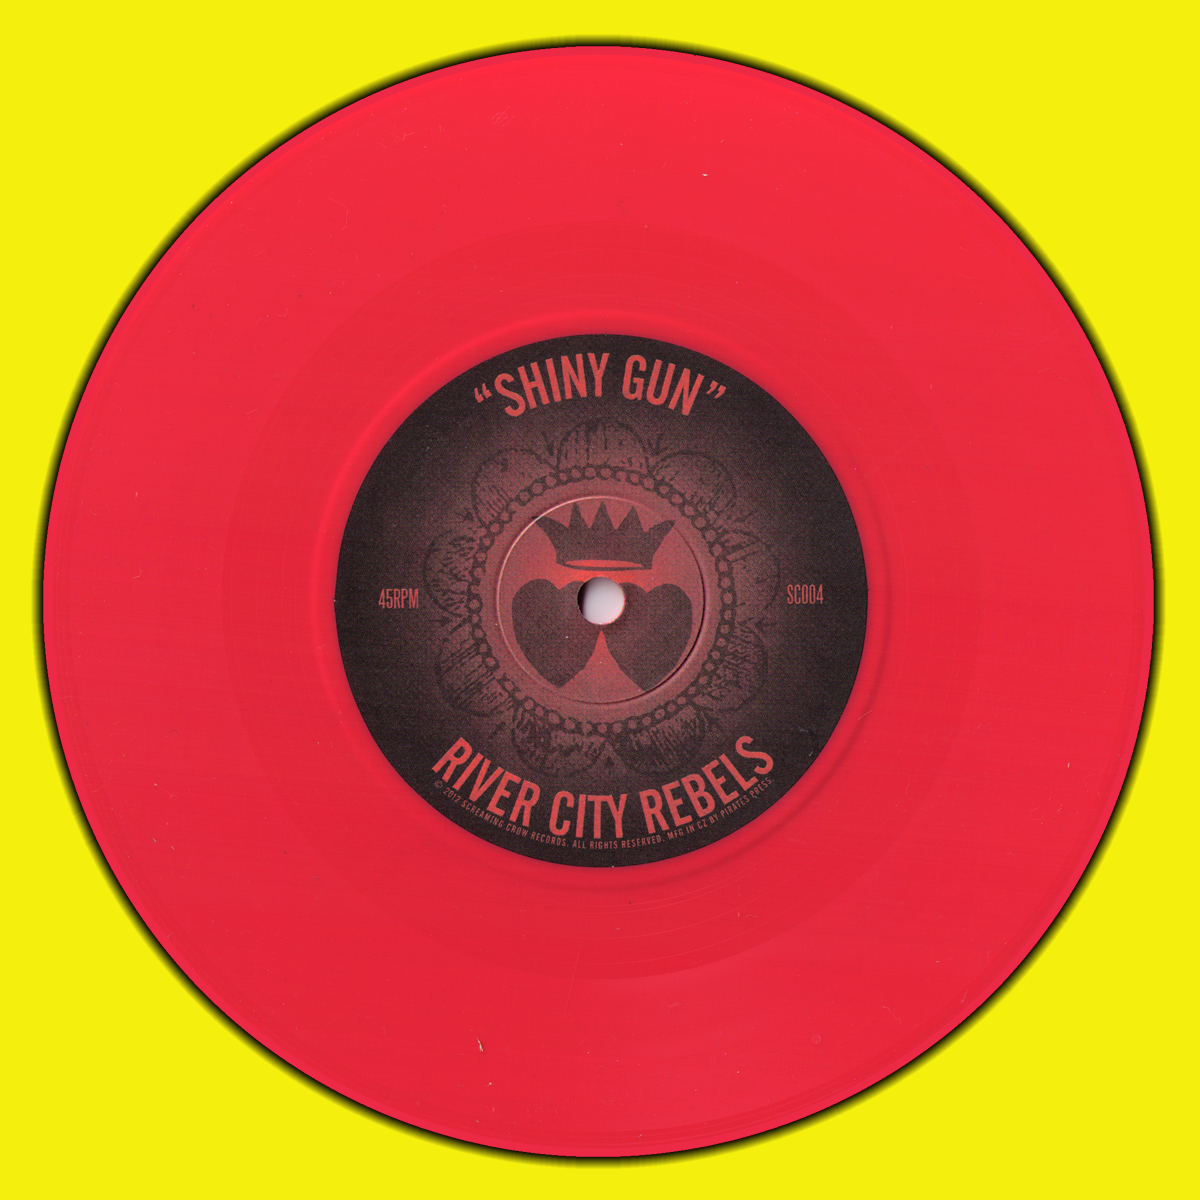 River City Rebels- Headed To Hell 7" ~RARE MAGENTA RED WAX W/ RIVER CITY REBELS STICKER!